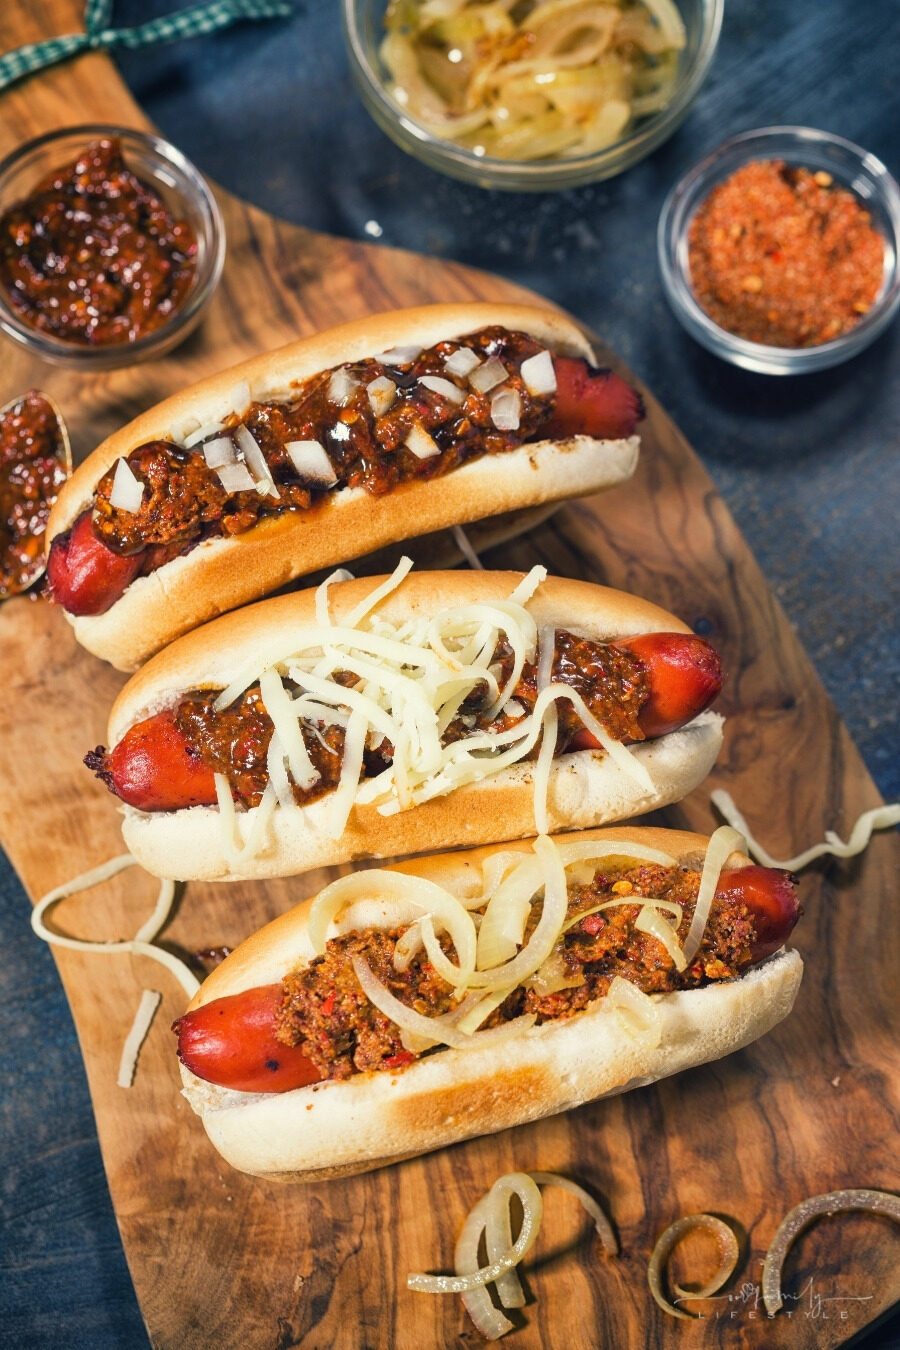 Surprise Your Family With These Easy to Prep Hot Dog Recipe Ideas